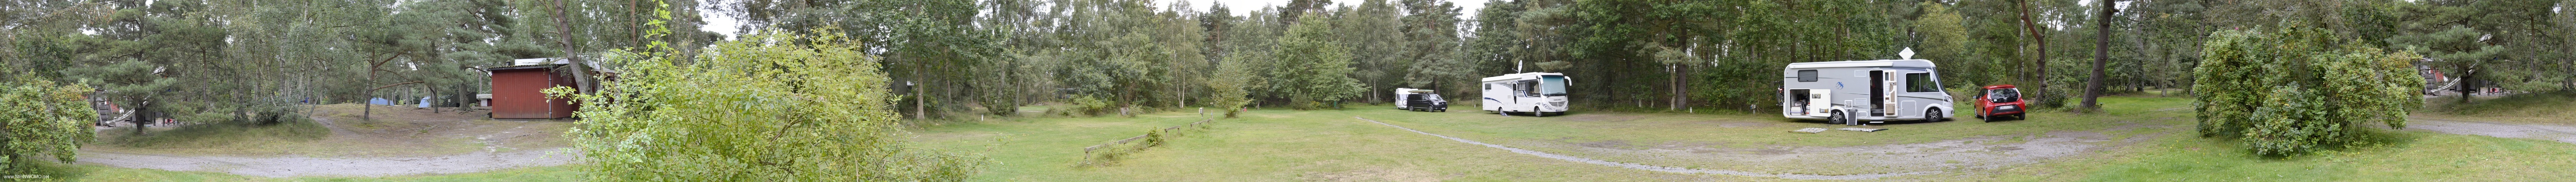  The picture shows the parking spaces for campers on Hundewald